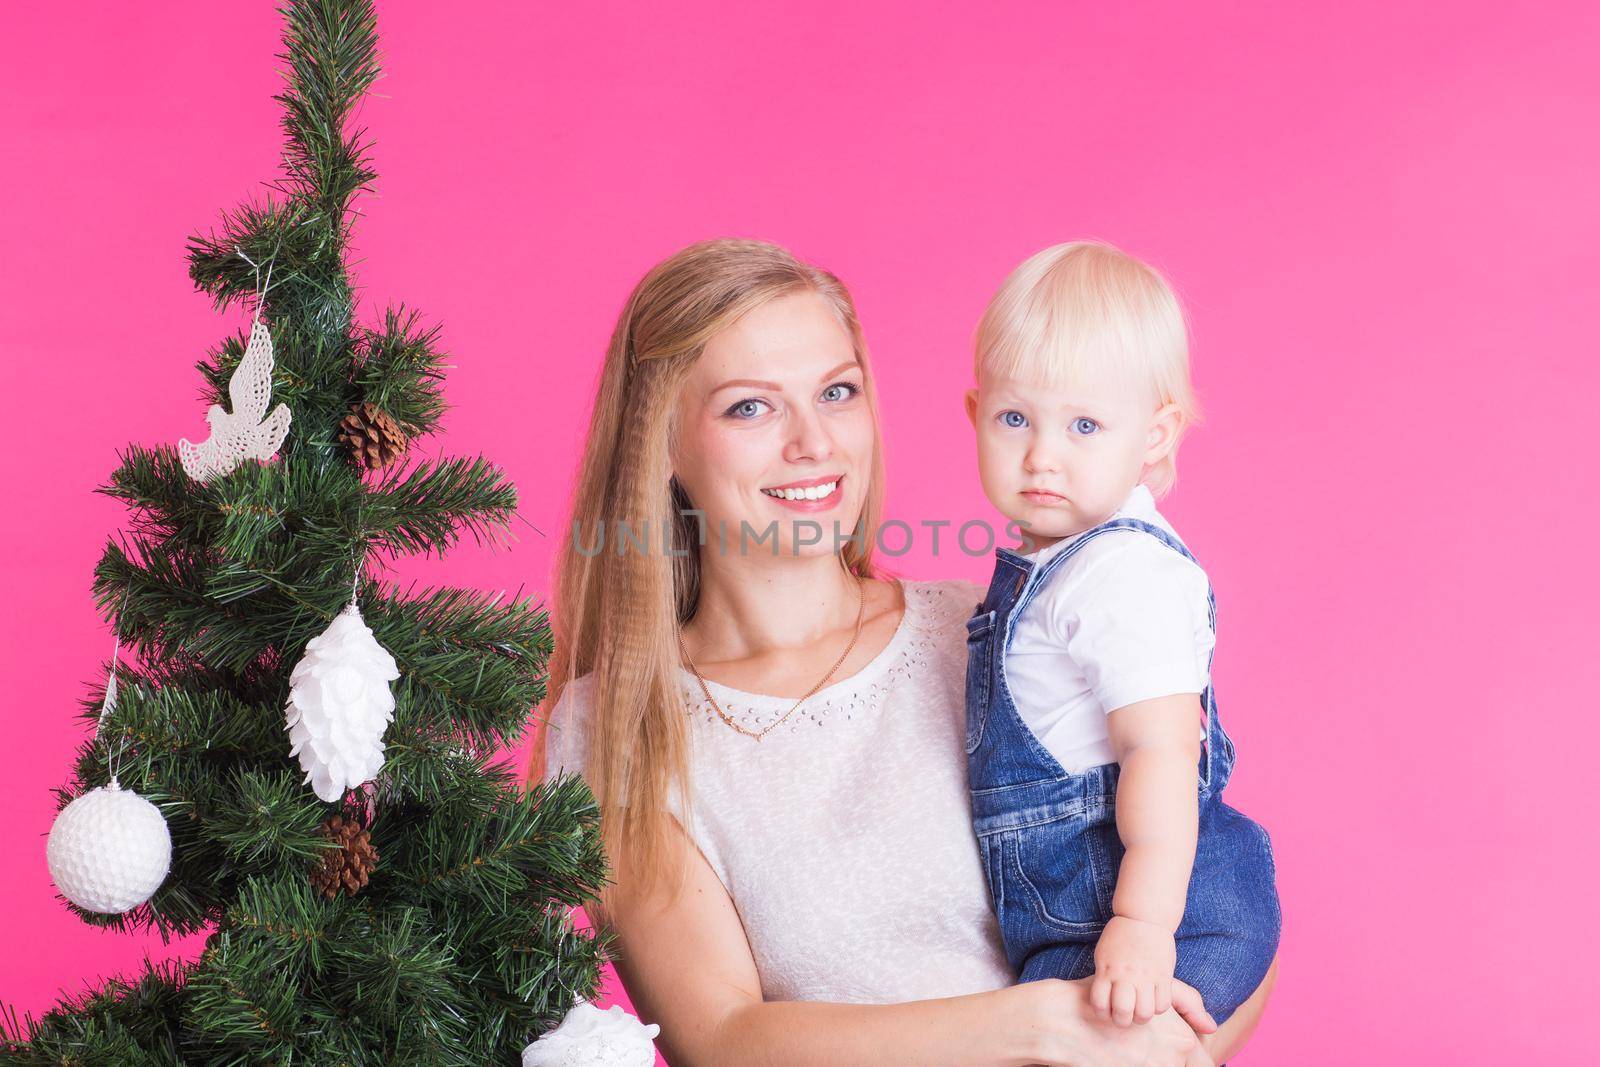 Christmas and holiday concept - Portrait of smiling woman with her little daughter decorating Christmas tree over pink background.